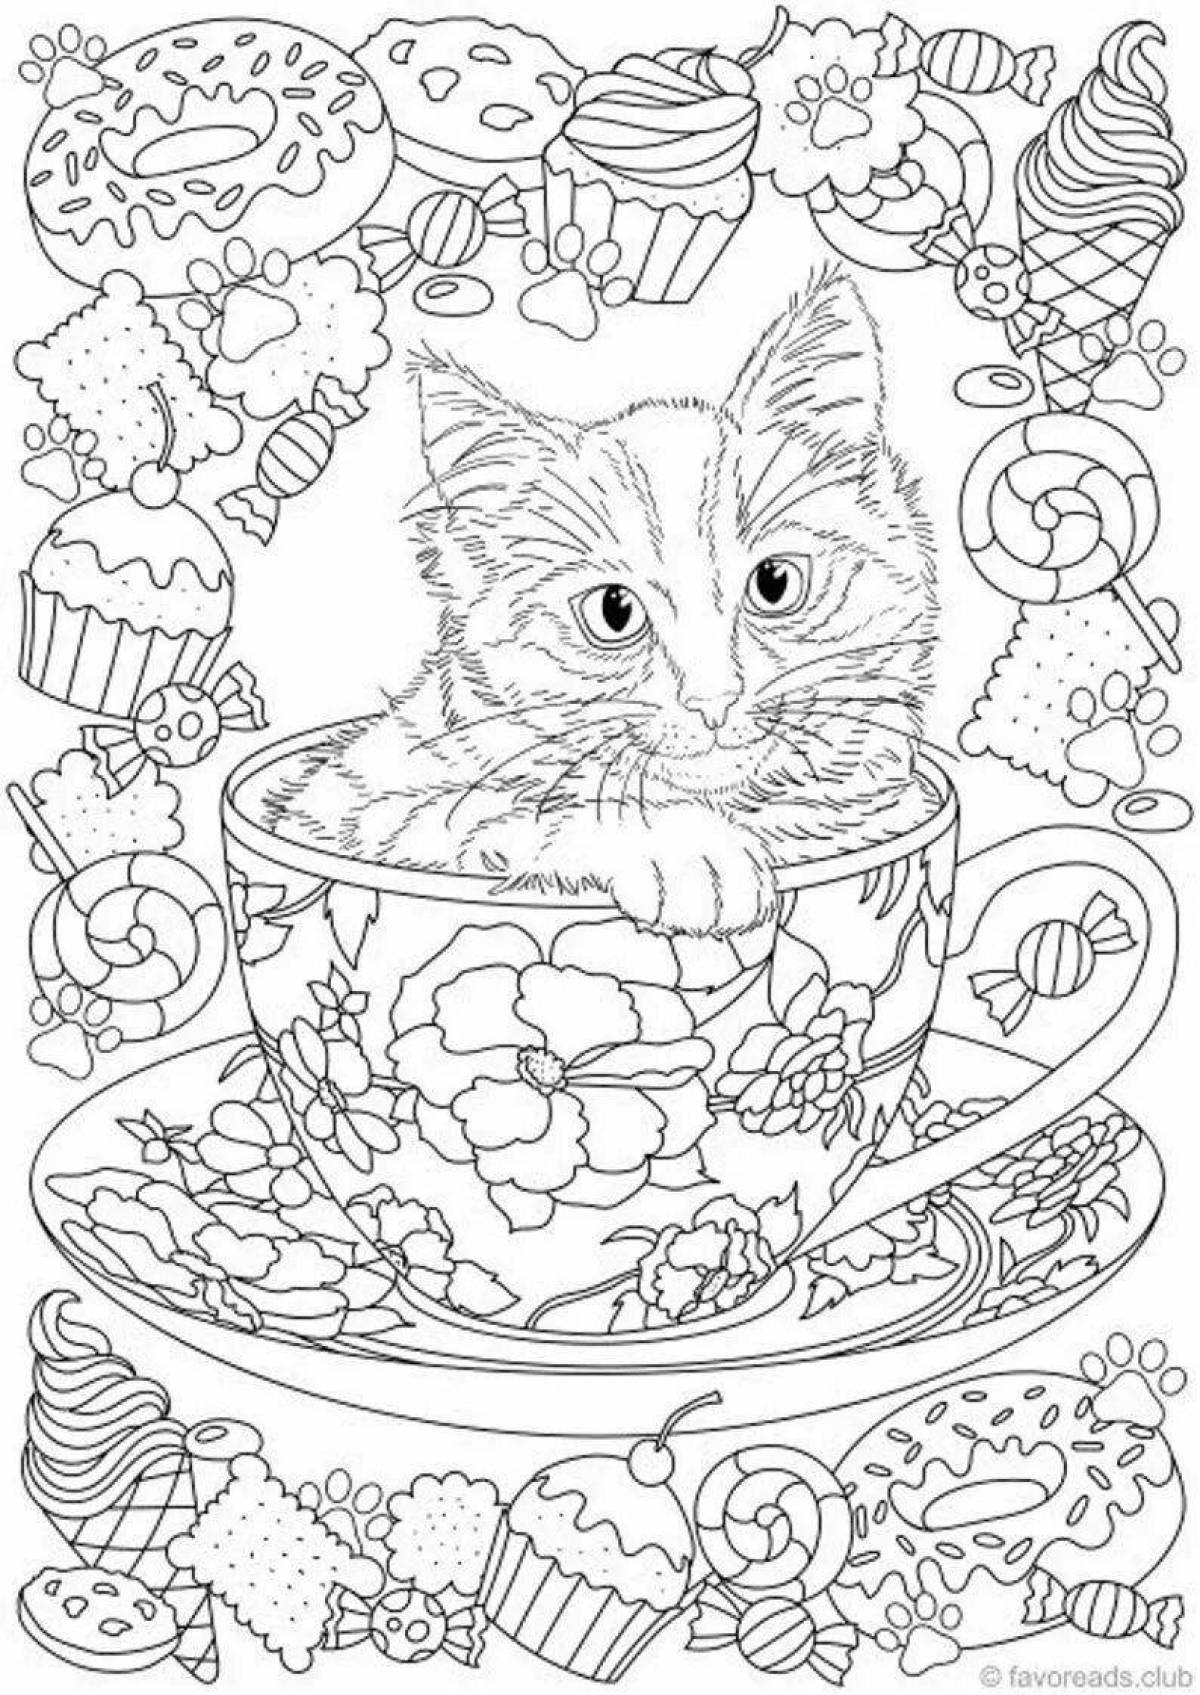 Cozy cat in a cup coloring page